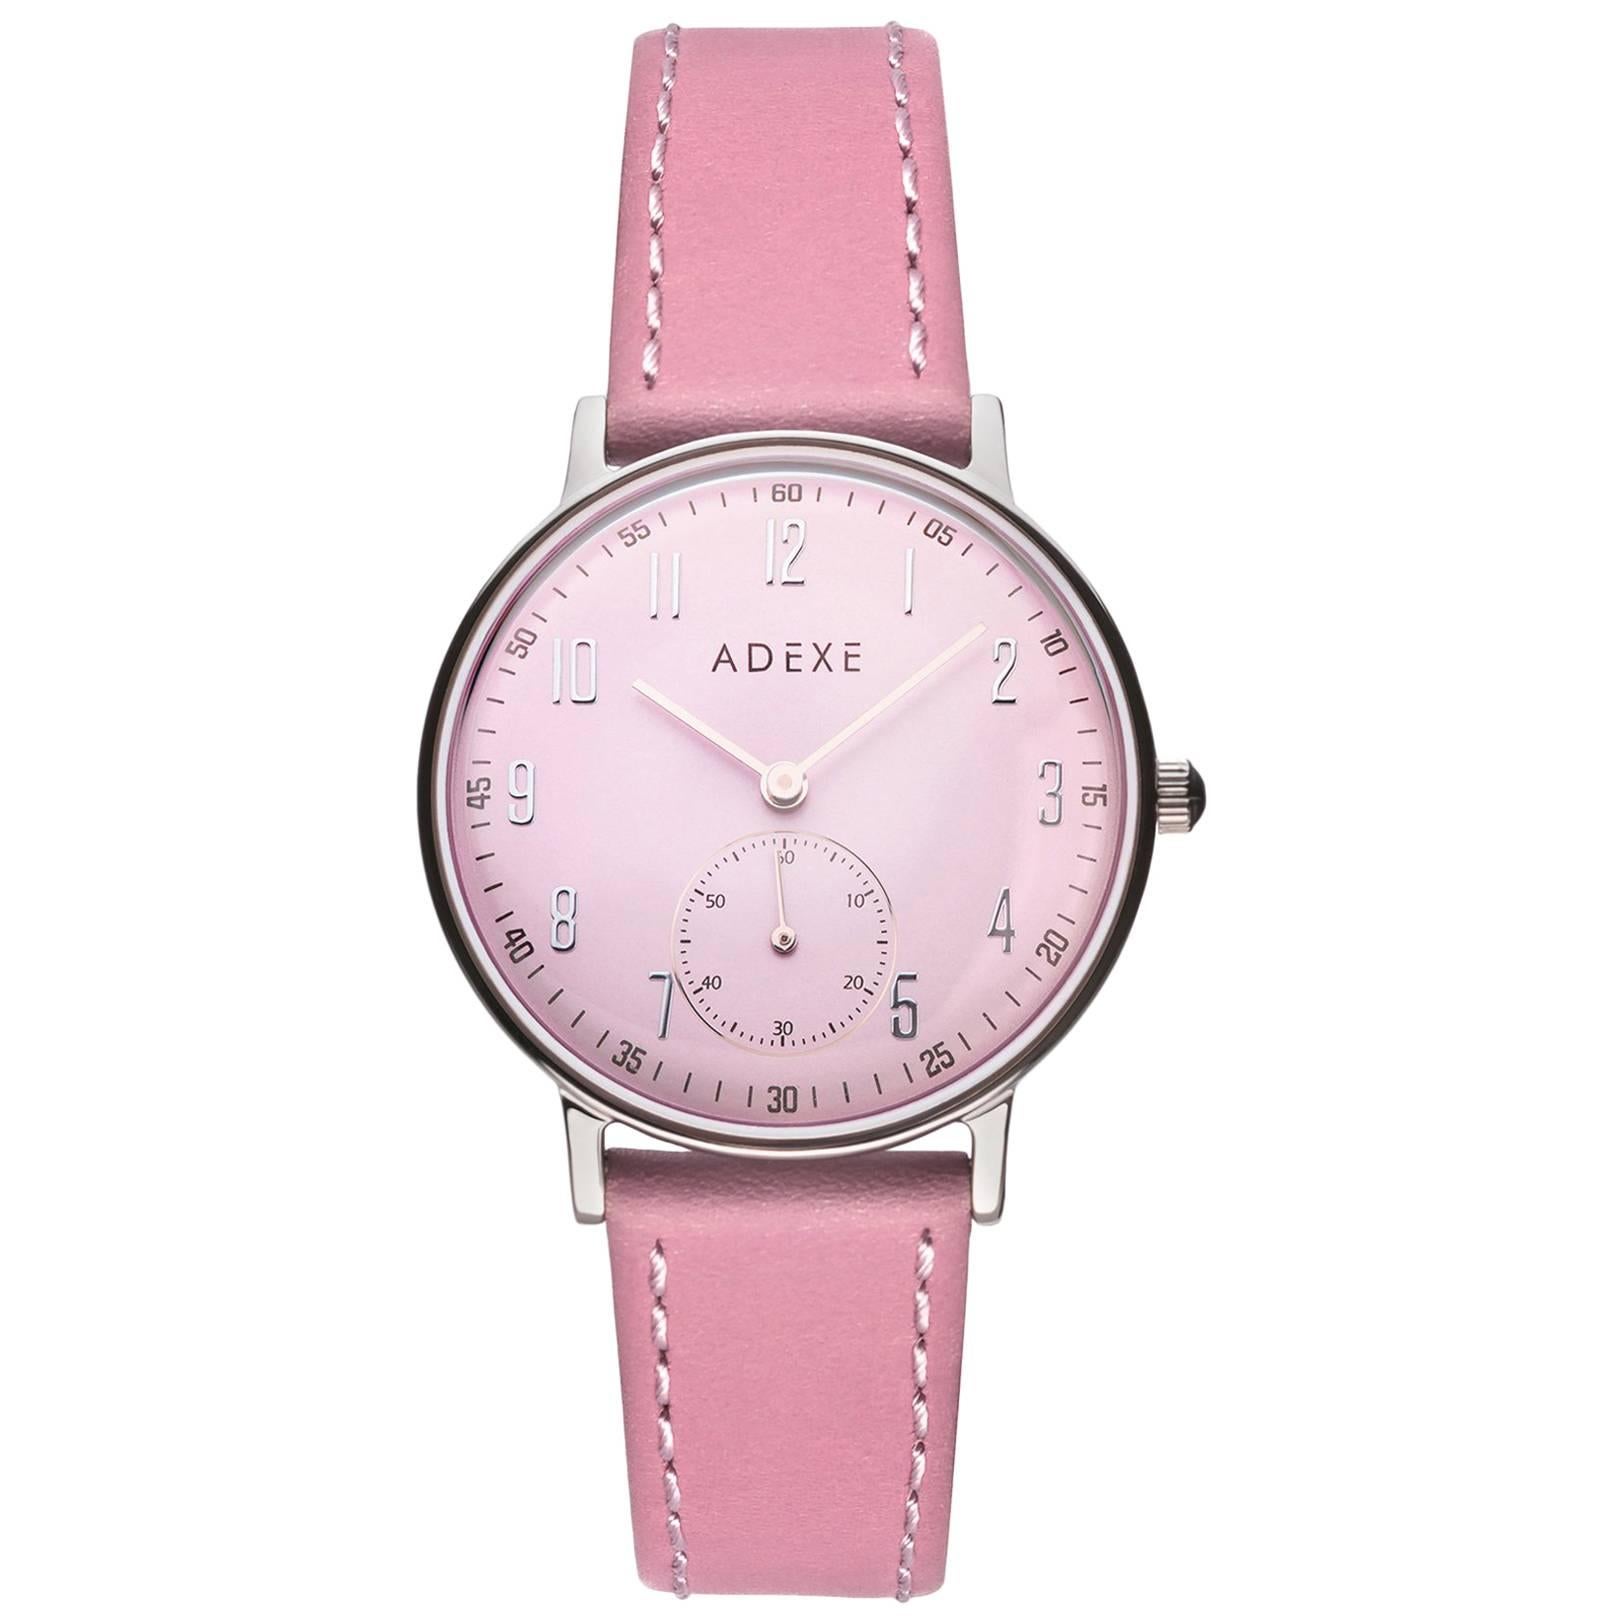 ADEXE Watches Ladies Stainless Steel Petite Quartz Wristwatch   For Sale